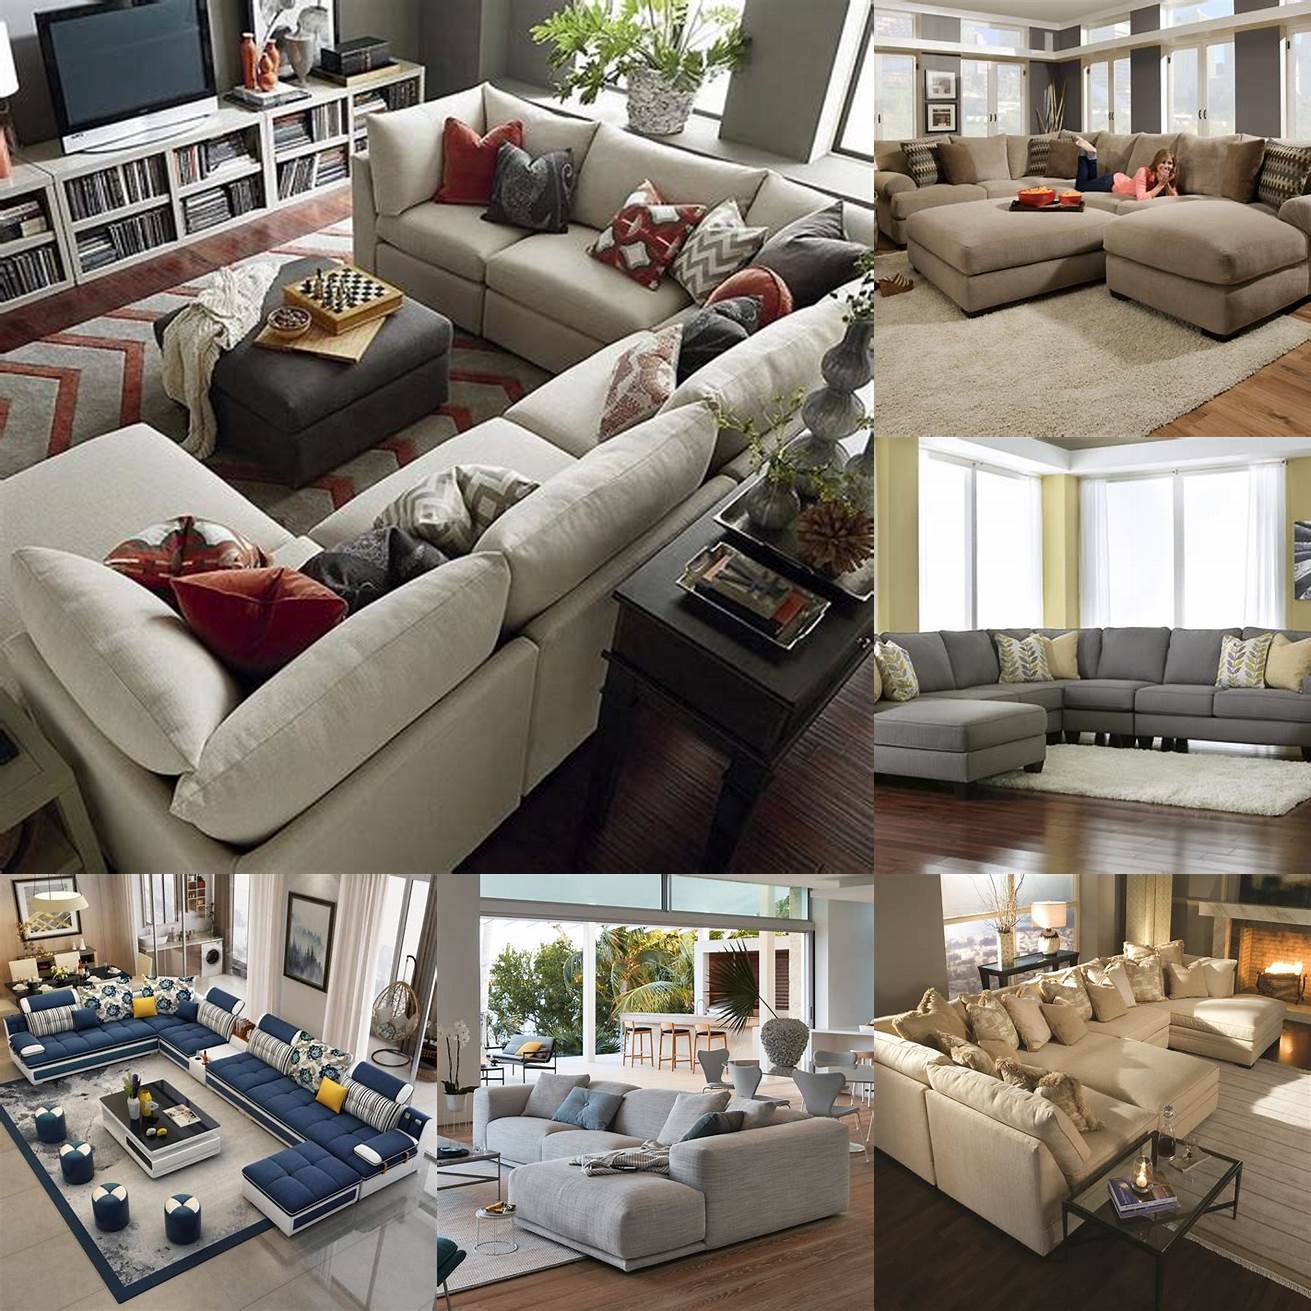 Image 6 A comfortable and casual modern sectional sofa in a family room